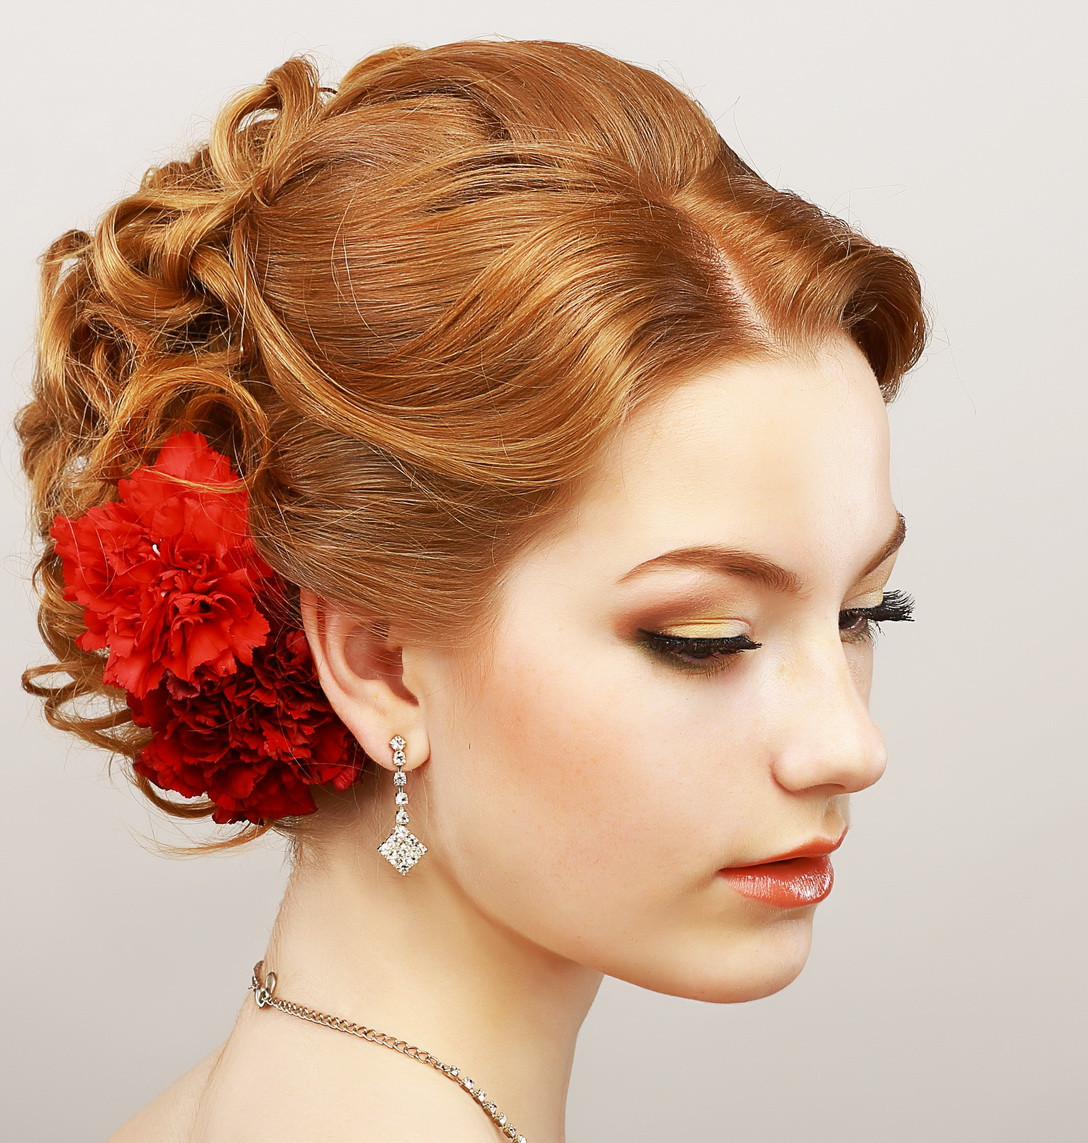 Prom Hairstyles Medium Length
 16 Easy Prom Hairstyles for Short and Medium Length Hair